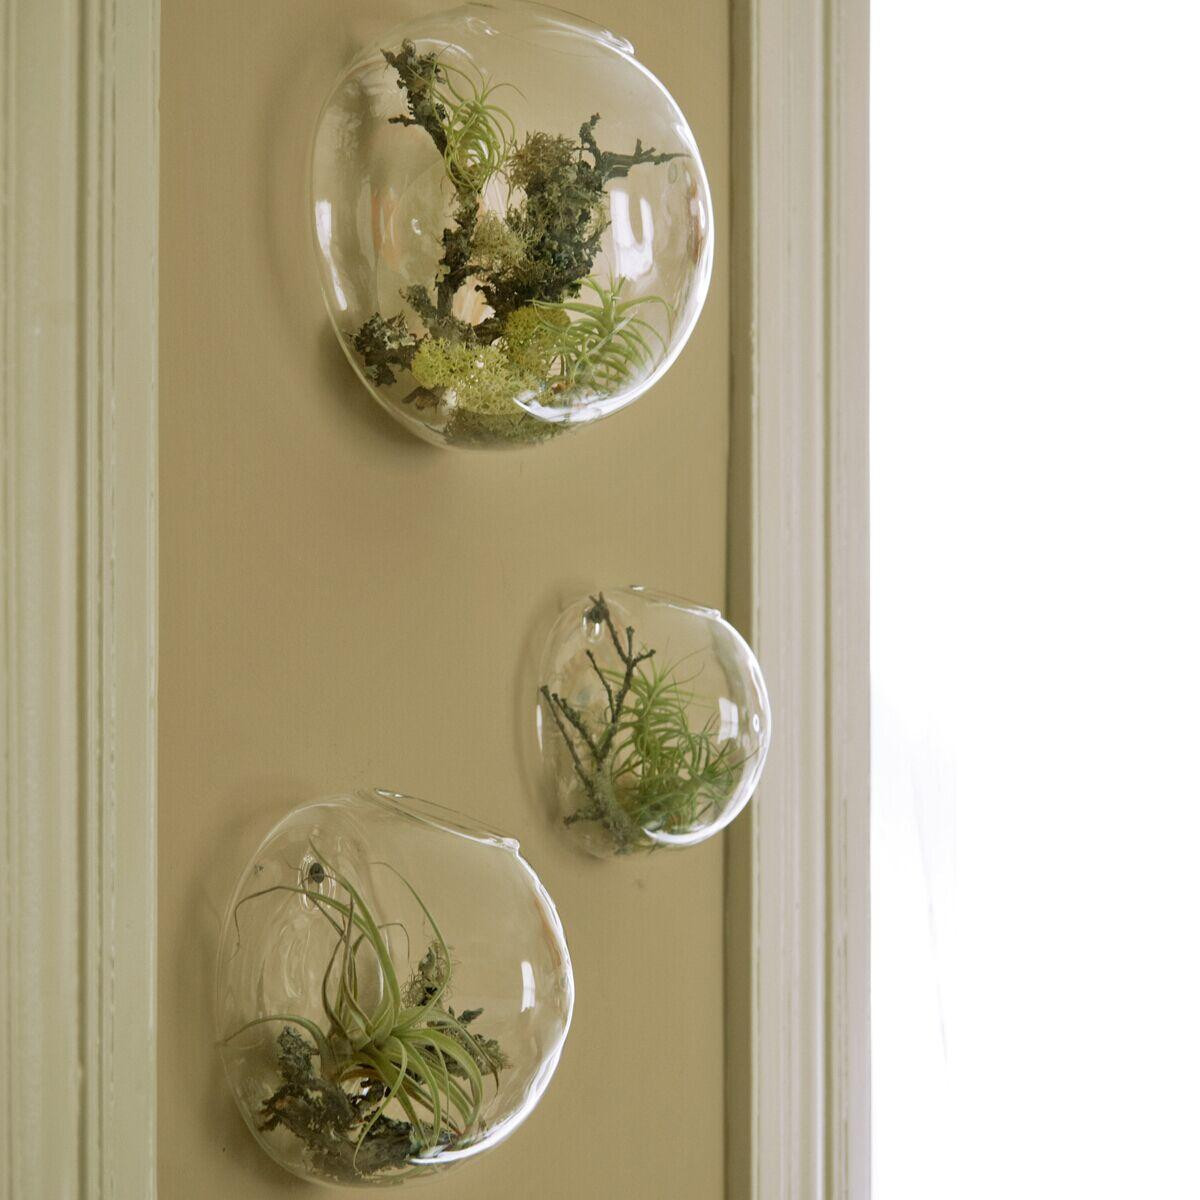 large glass fish vase of wall bubble terrariums glass wall vase for flowers indoor plants for wall bubble terrariums glass wall vase for flowers indoor plants wall mounted planter for succulents air plant holders home decor inexpensive floor vases